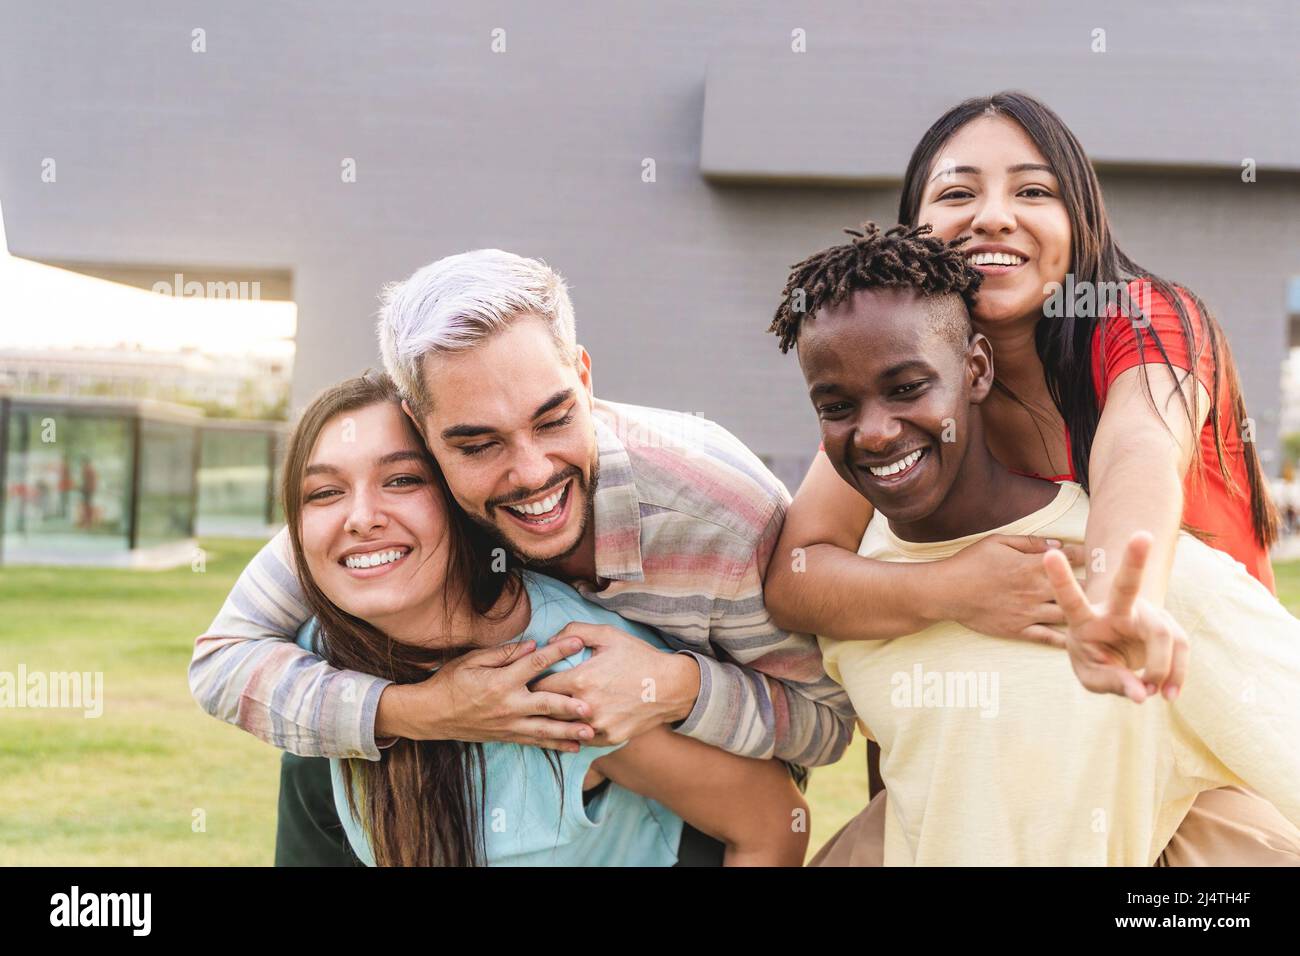 Diverse young people having fun together outdoor - Diversity lifestyle concept - Focus on gay man face Stock Photo